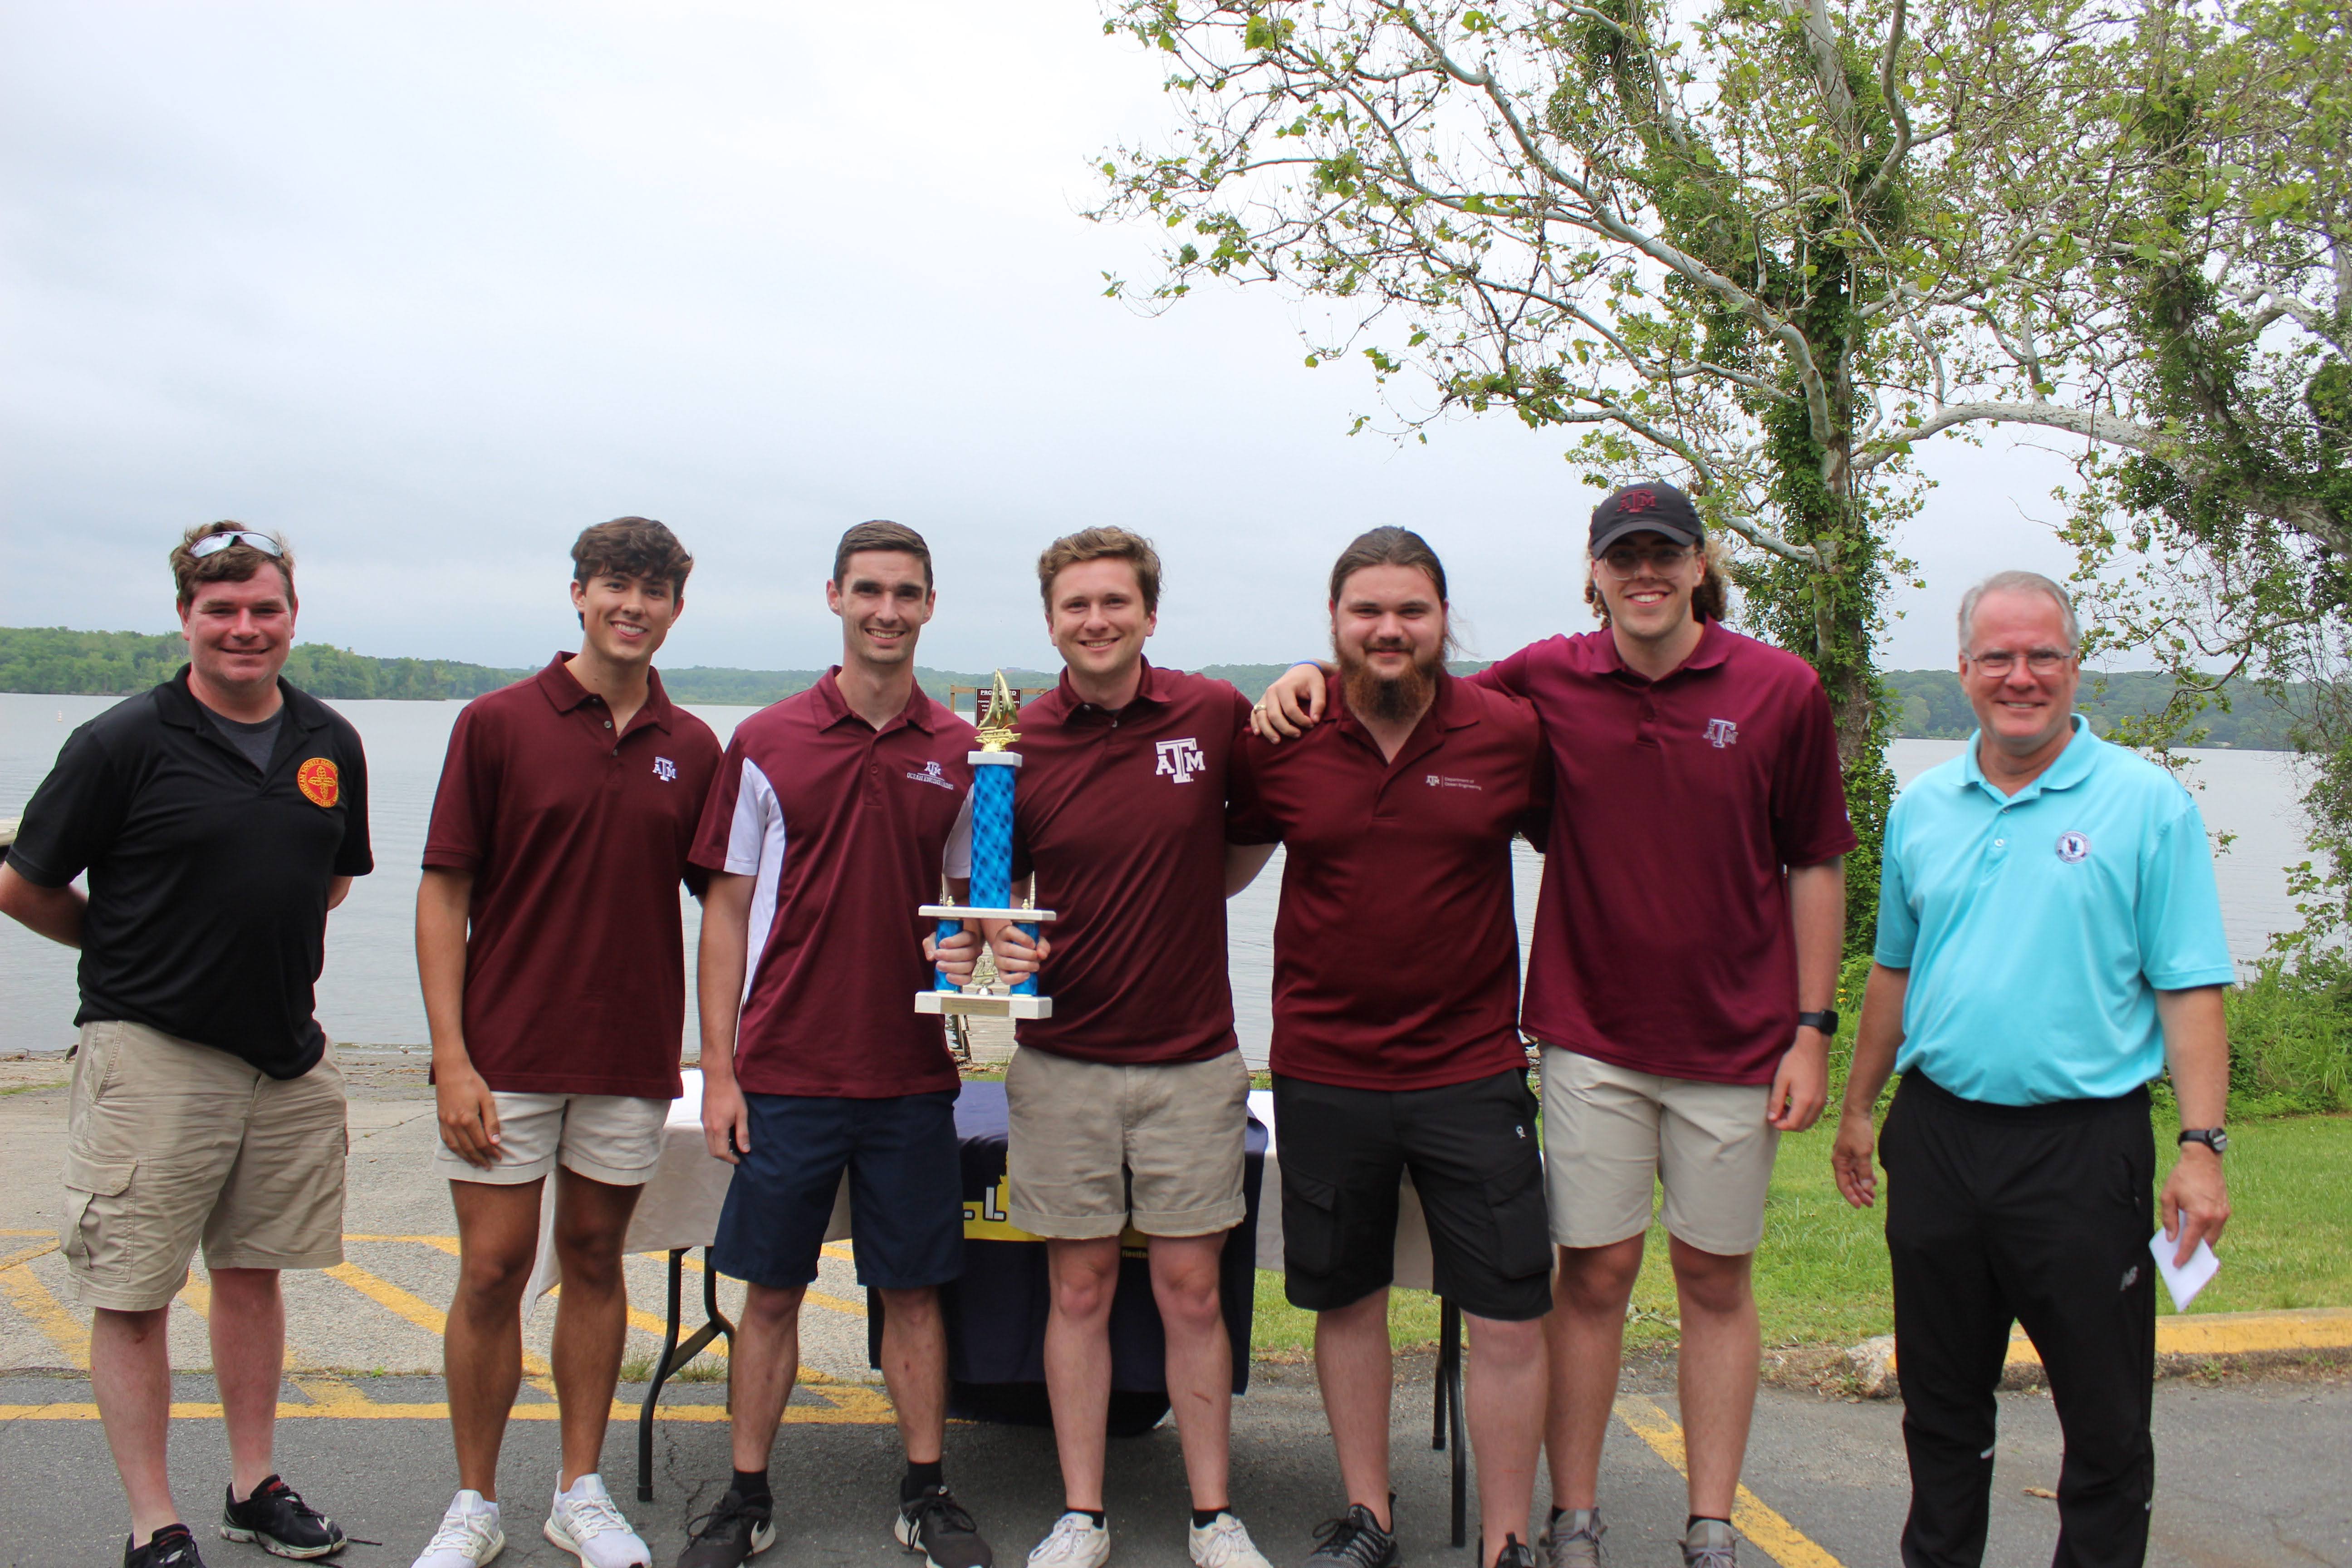 Unmanned 1st Place: Texas A&M